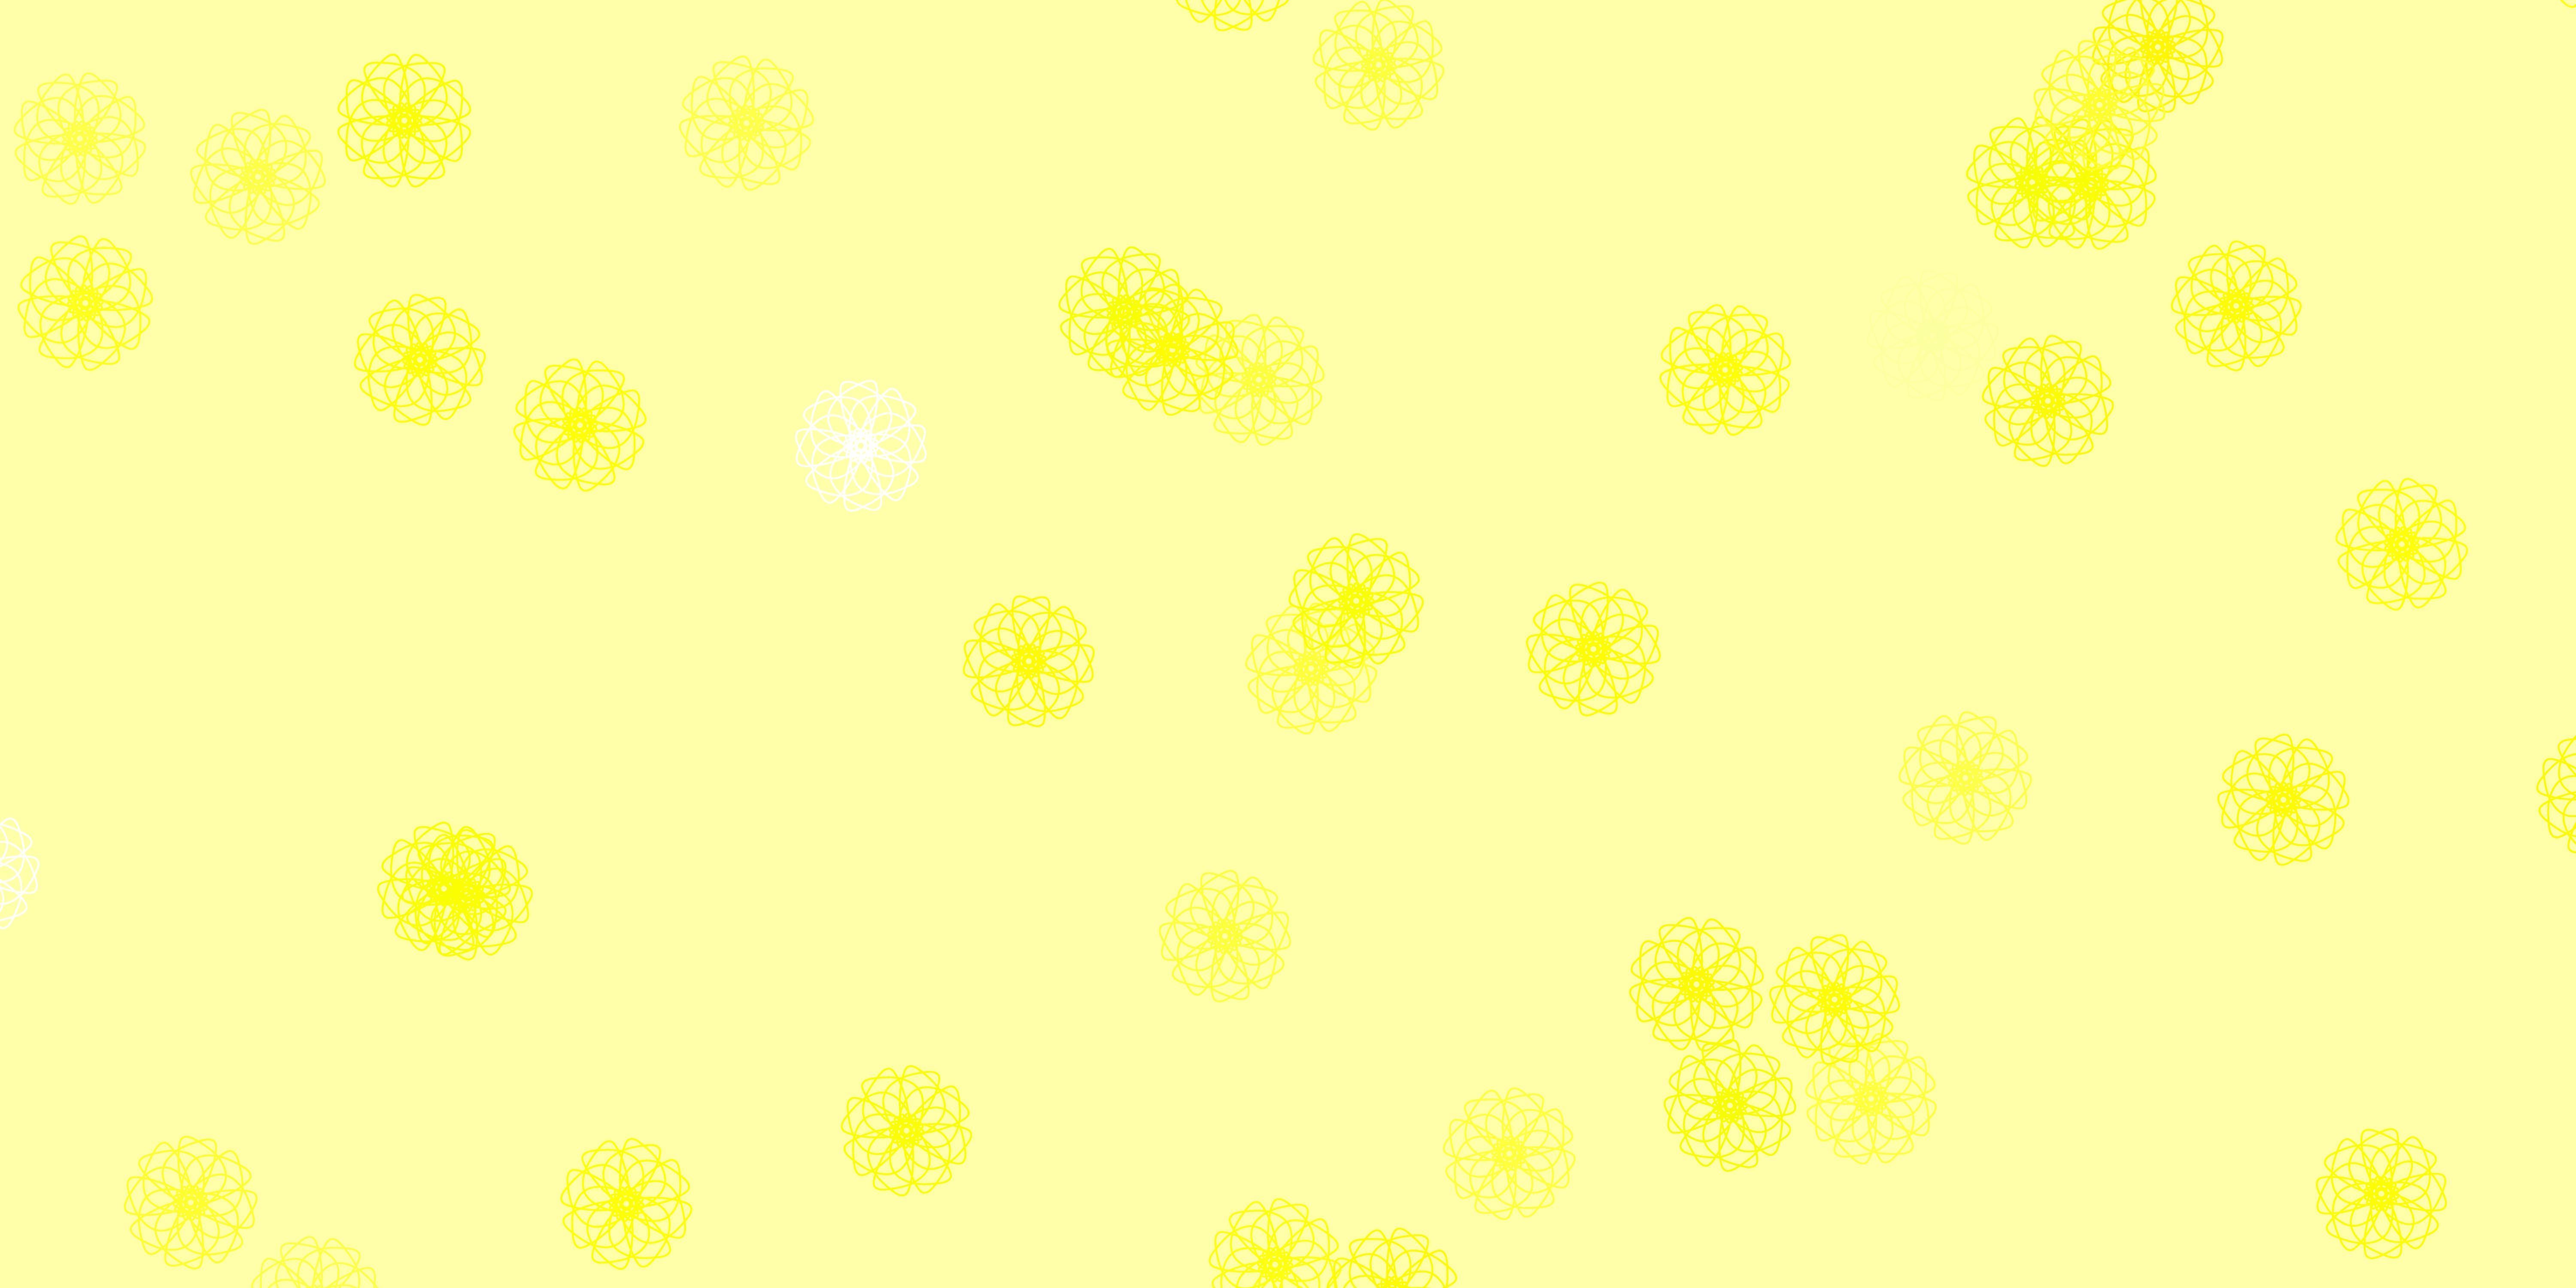 Light Yellow vector doodle background with flowers